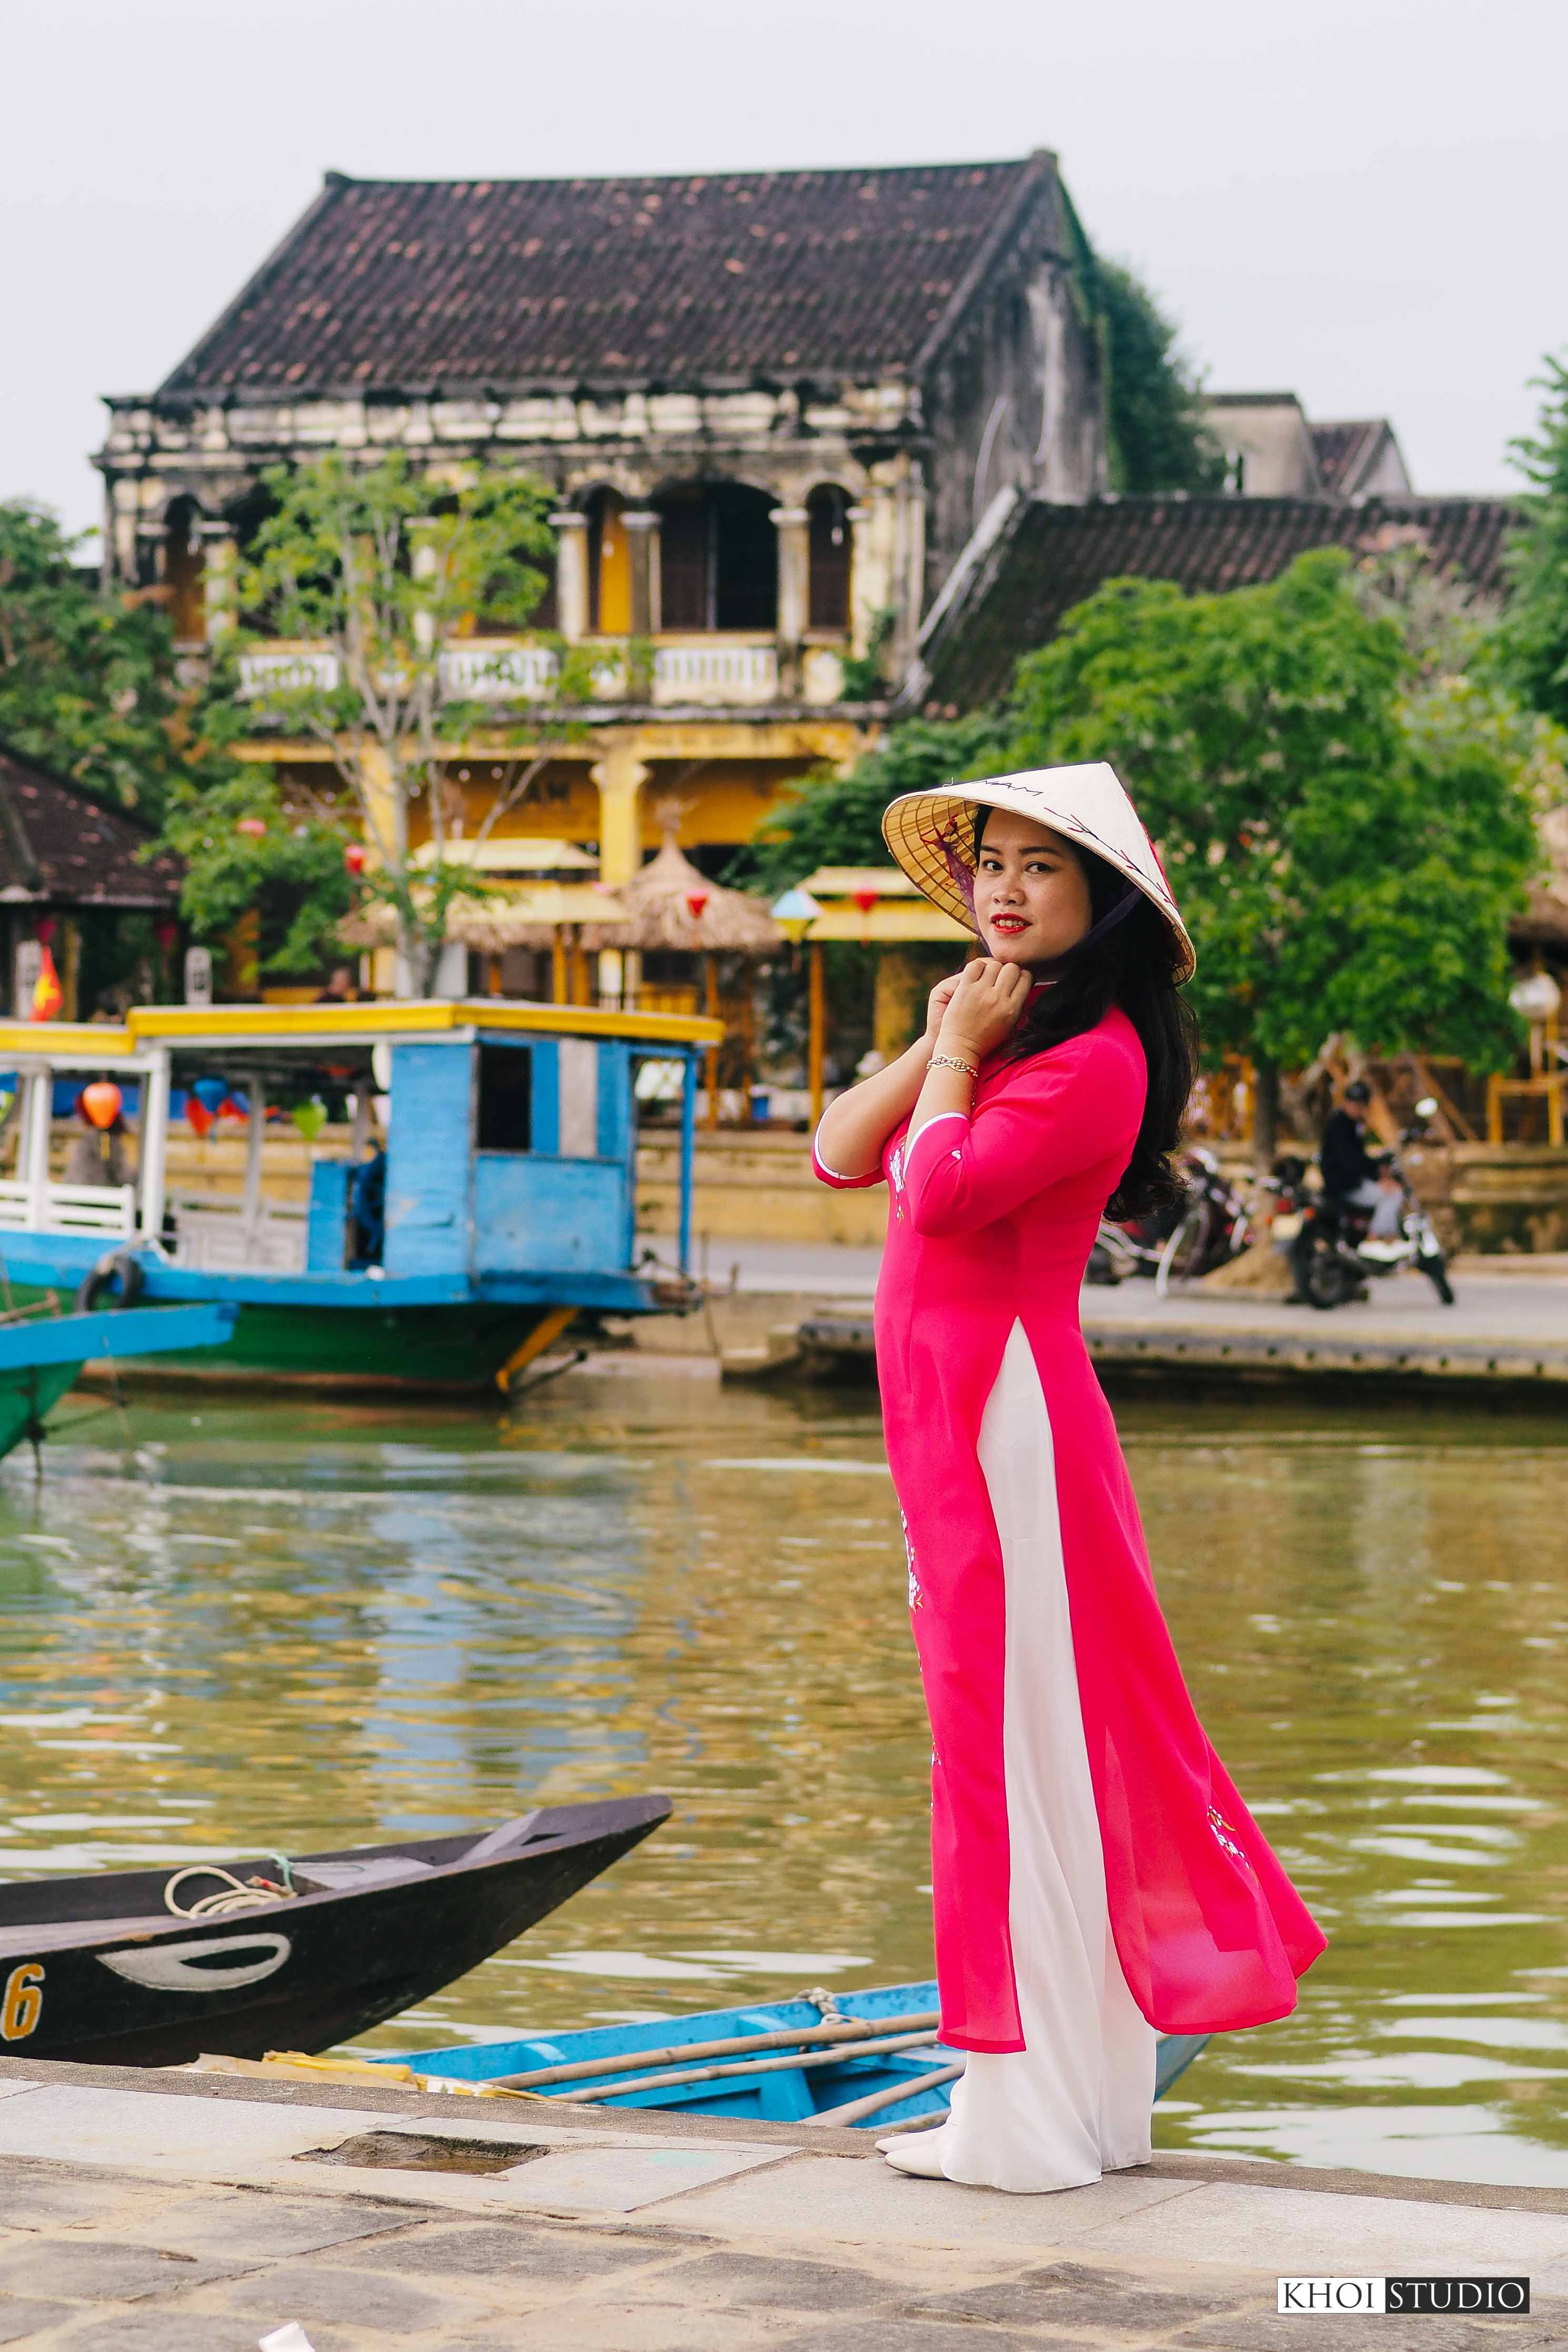 Tourist photography tour in Da Nang & Hoi An: Choosing a pink ao dai for a portrait session in Hoi An ancient town